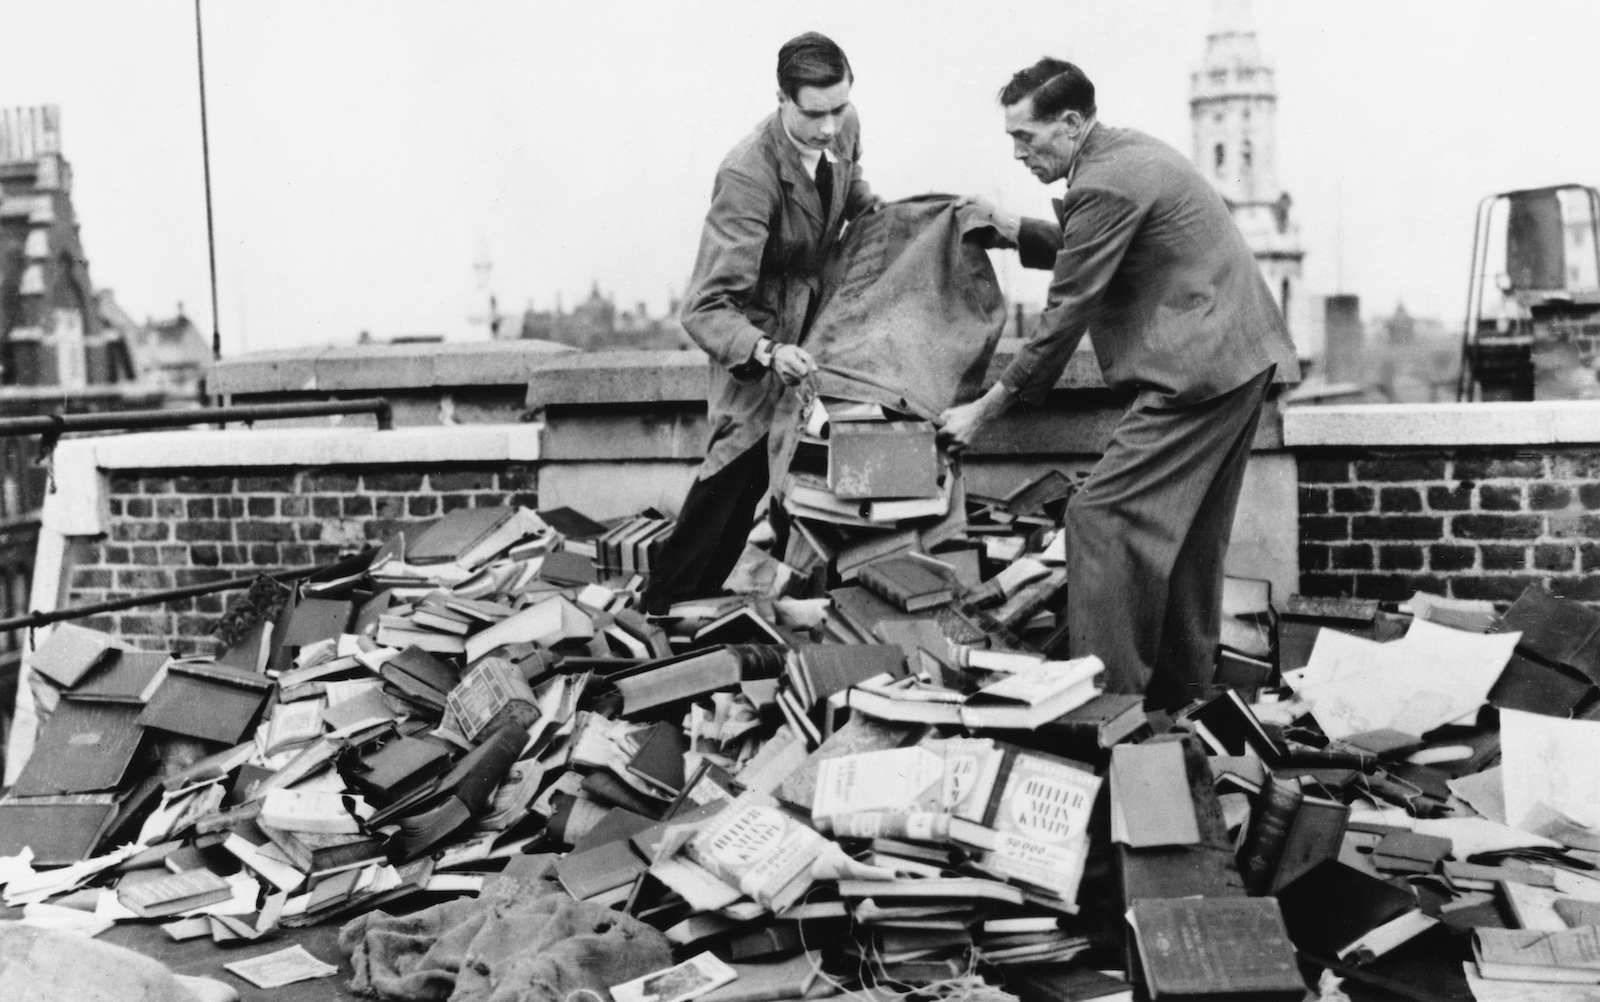 Foyles employees use copies of Adolf Hitler’s Mein Kampf to protect their room from possible German bombs, London, 5 September 1939.